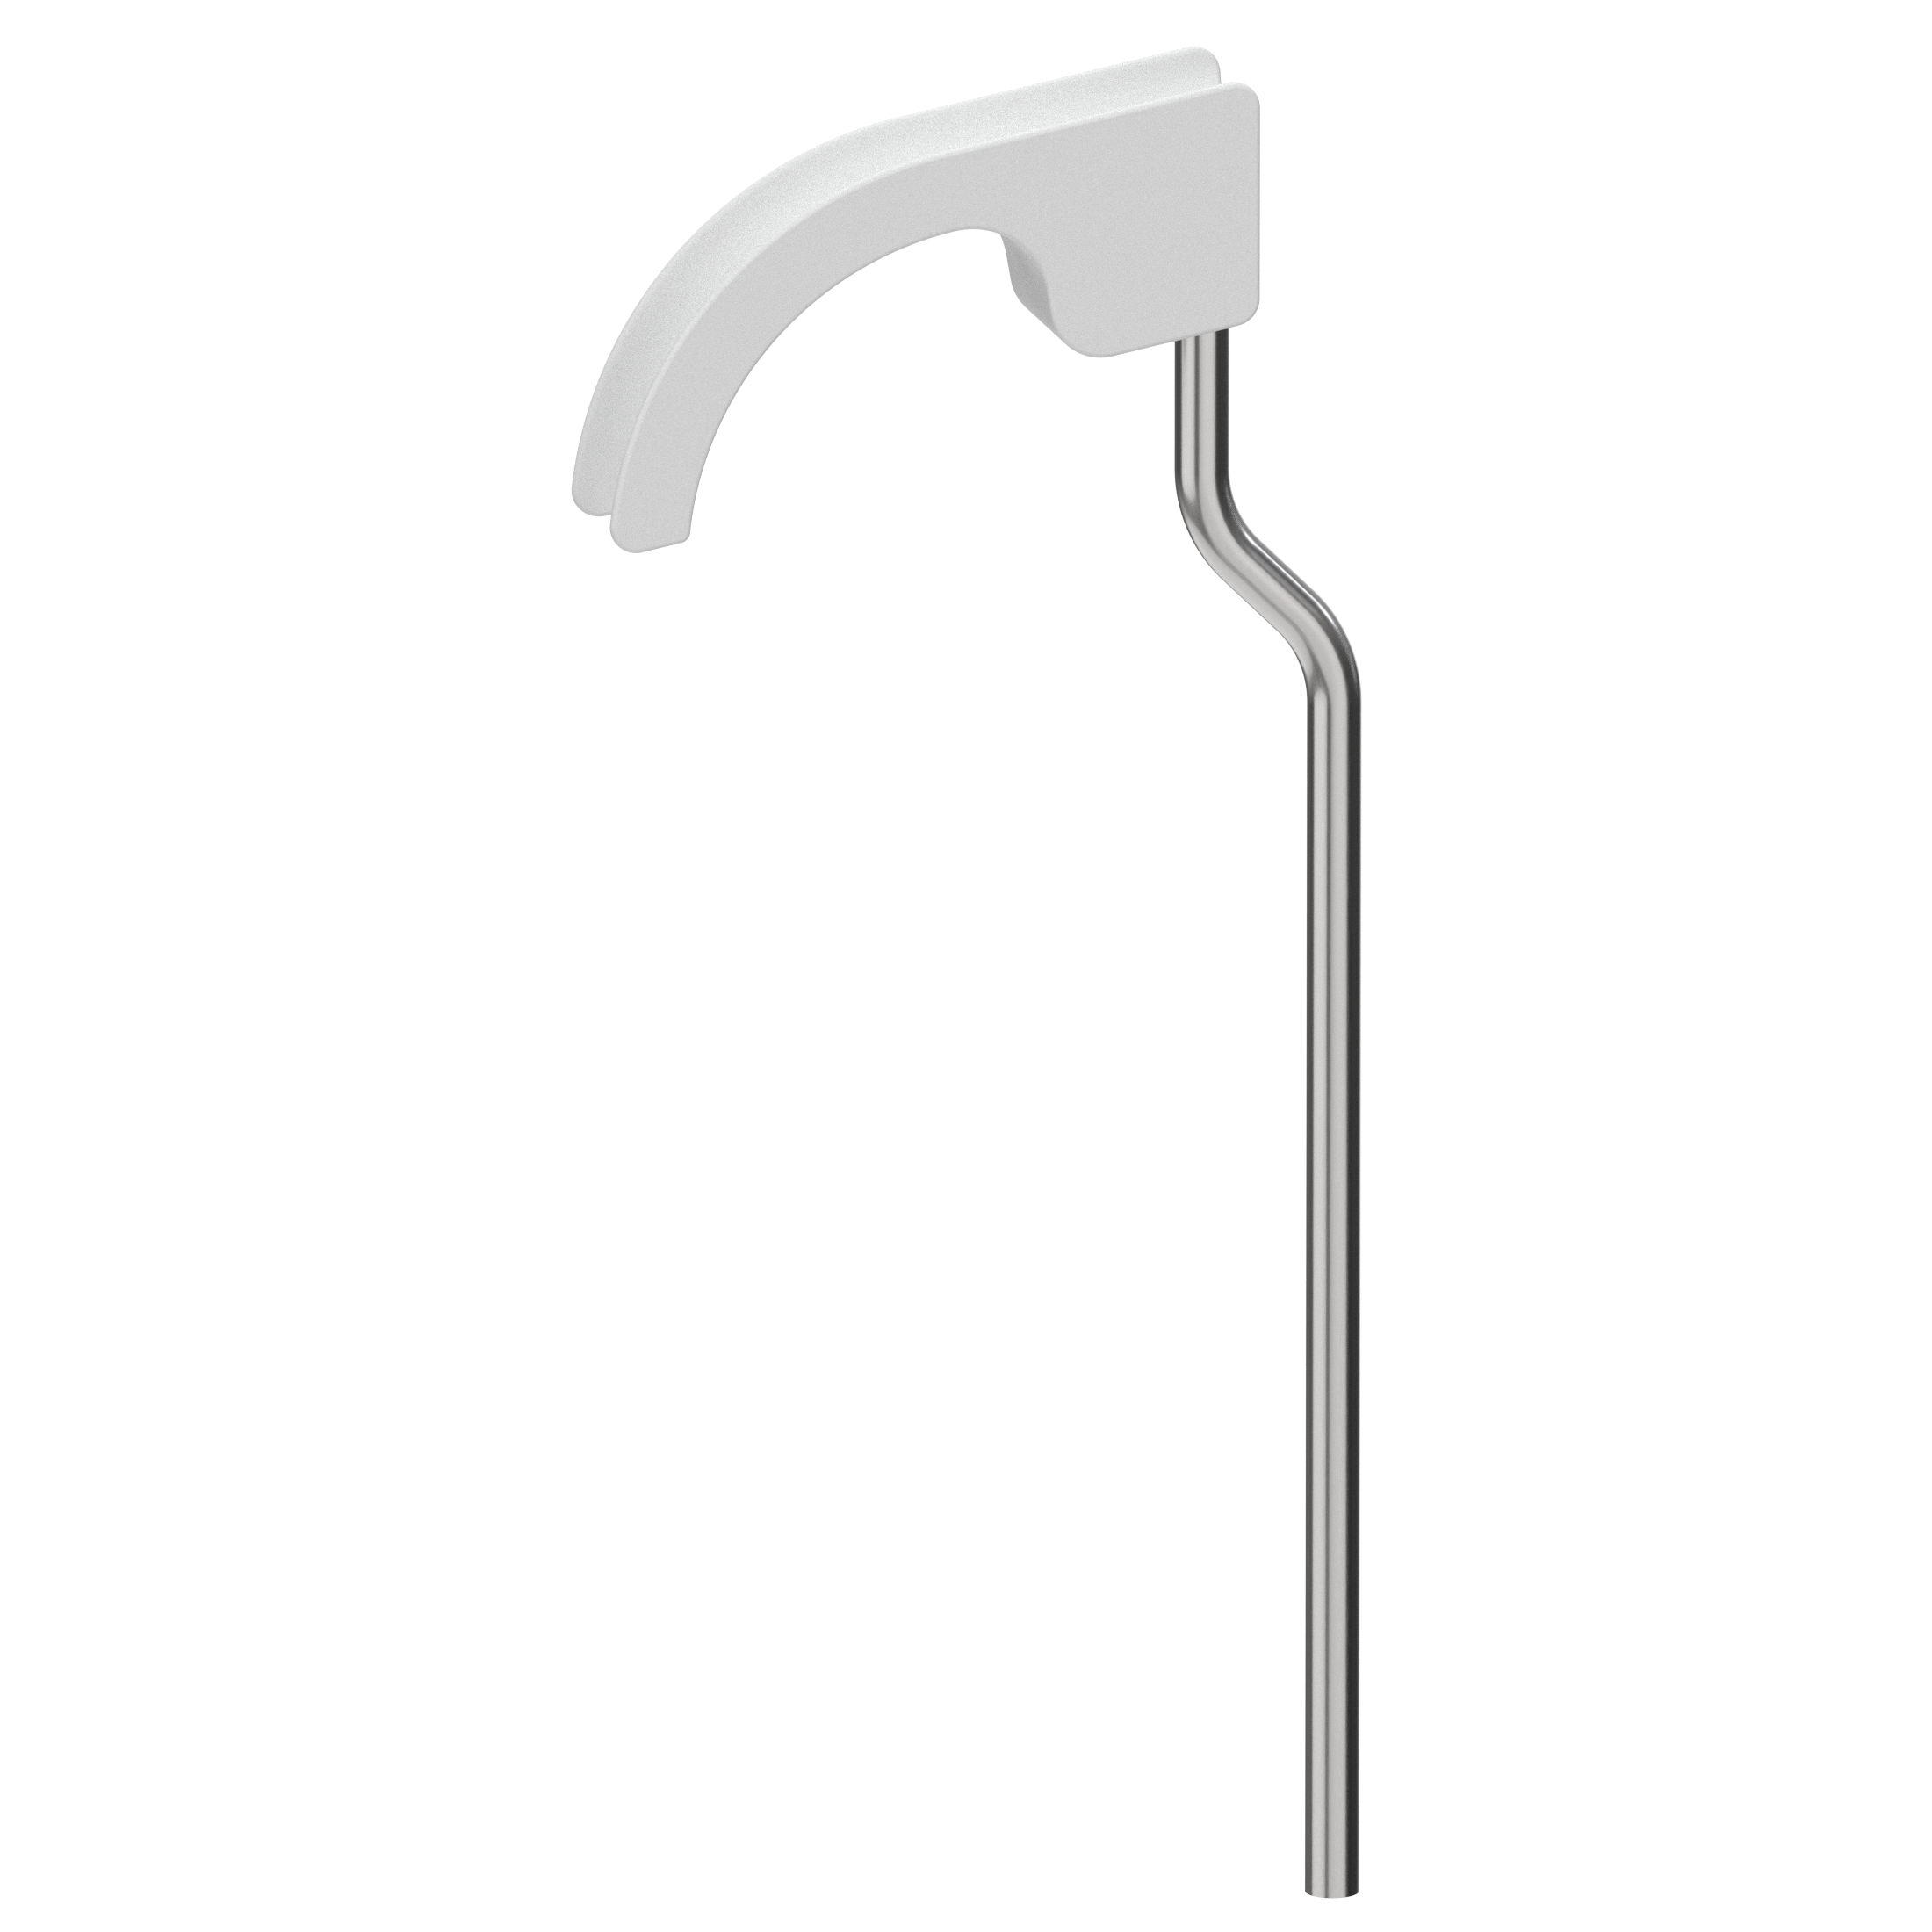 Endoscope handle support for Simple-Fix